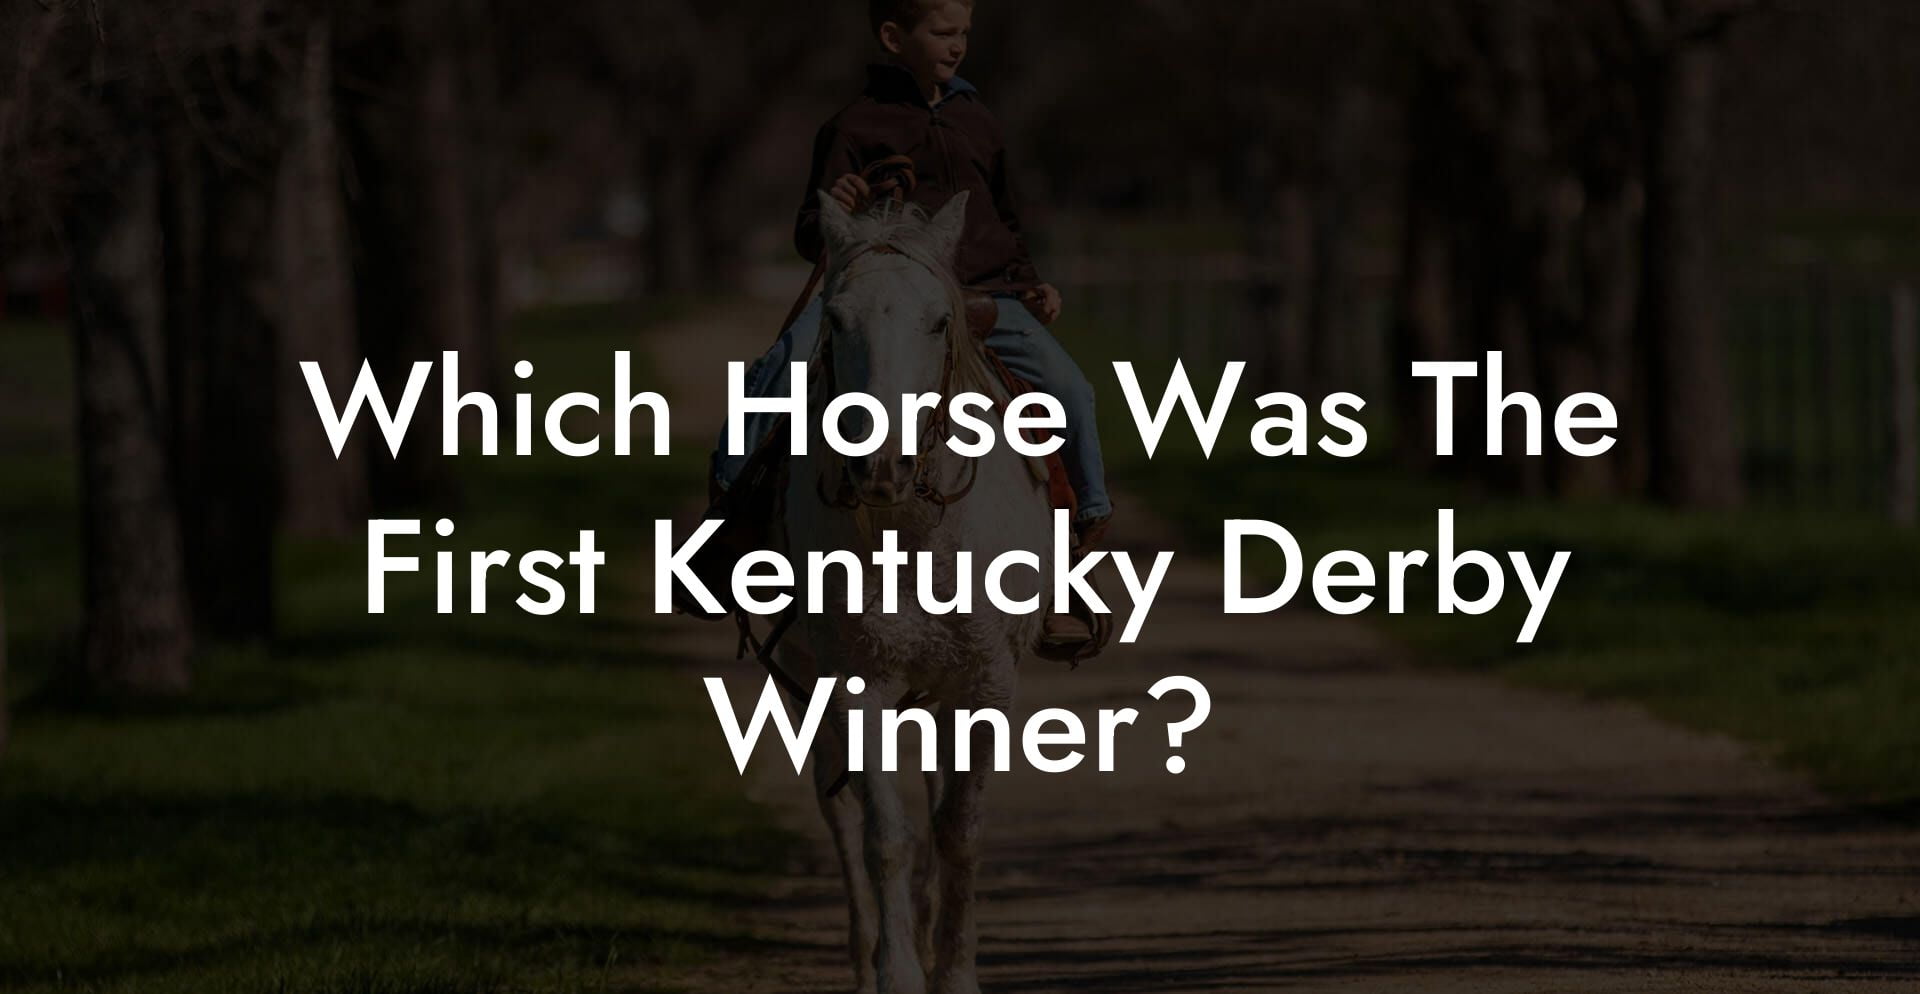 Which Horse Was The First Kentucky Derby Winner?